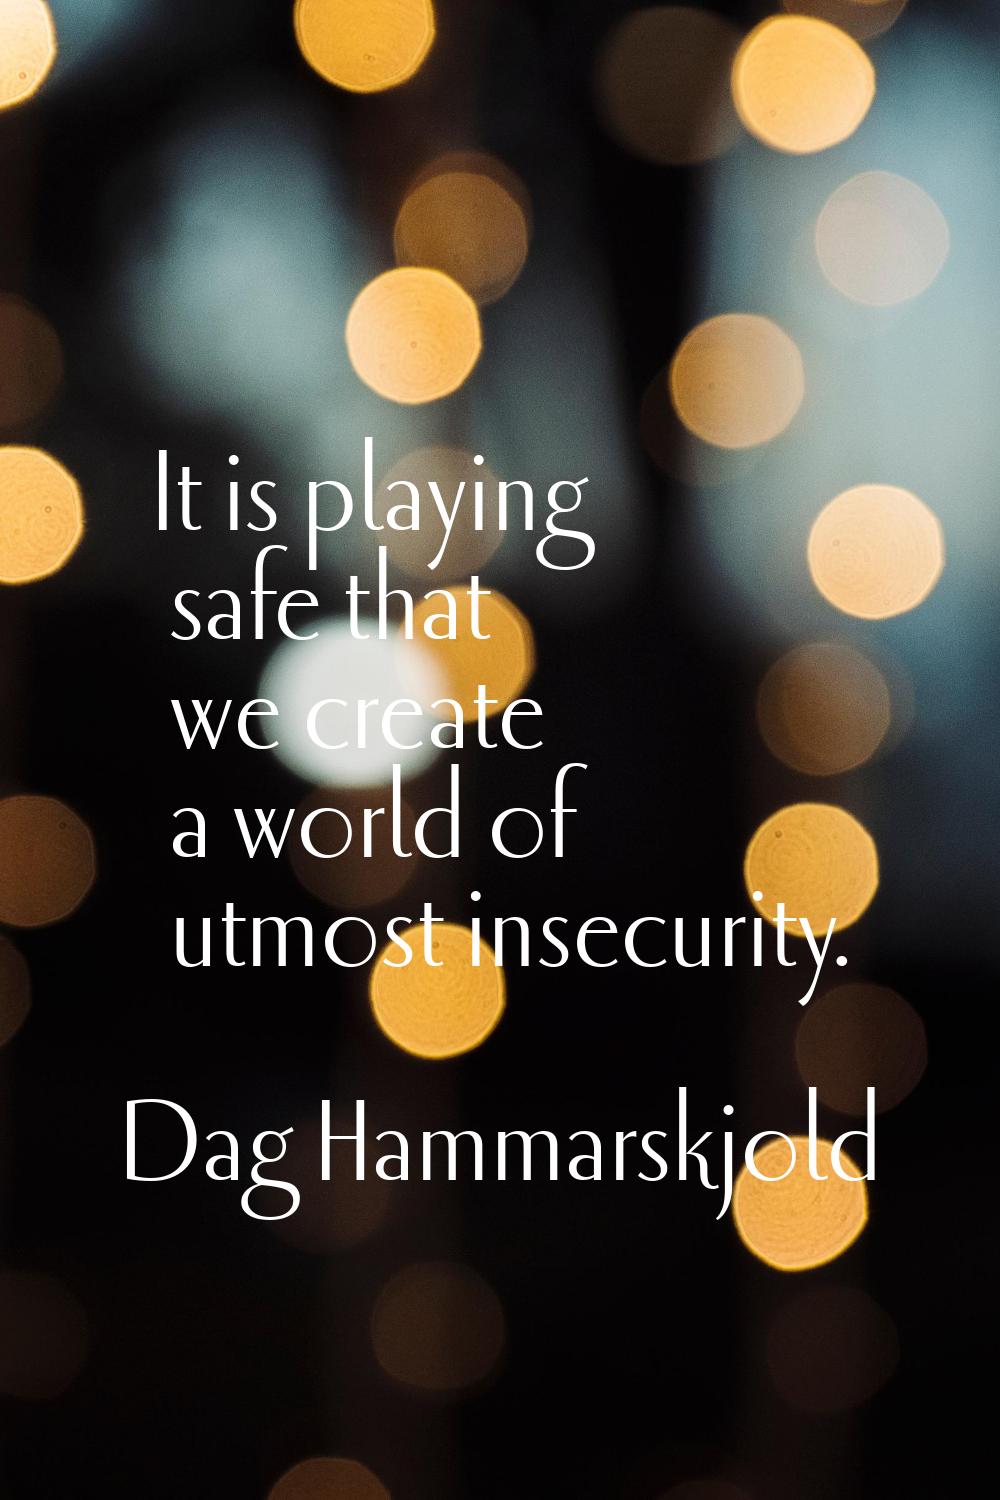 It is playing safe that we create a world of utmost insecurity.